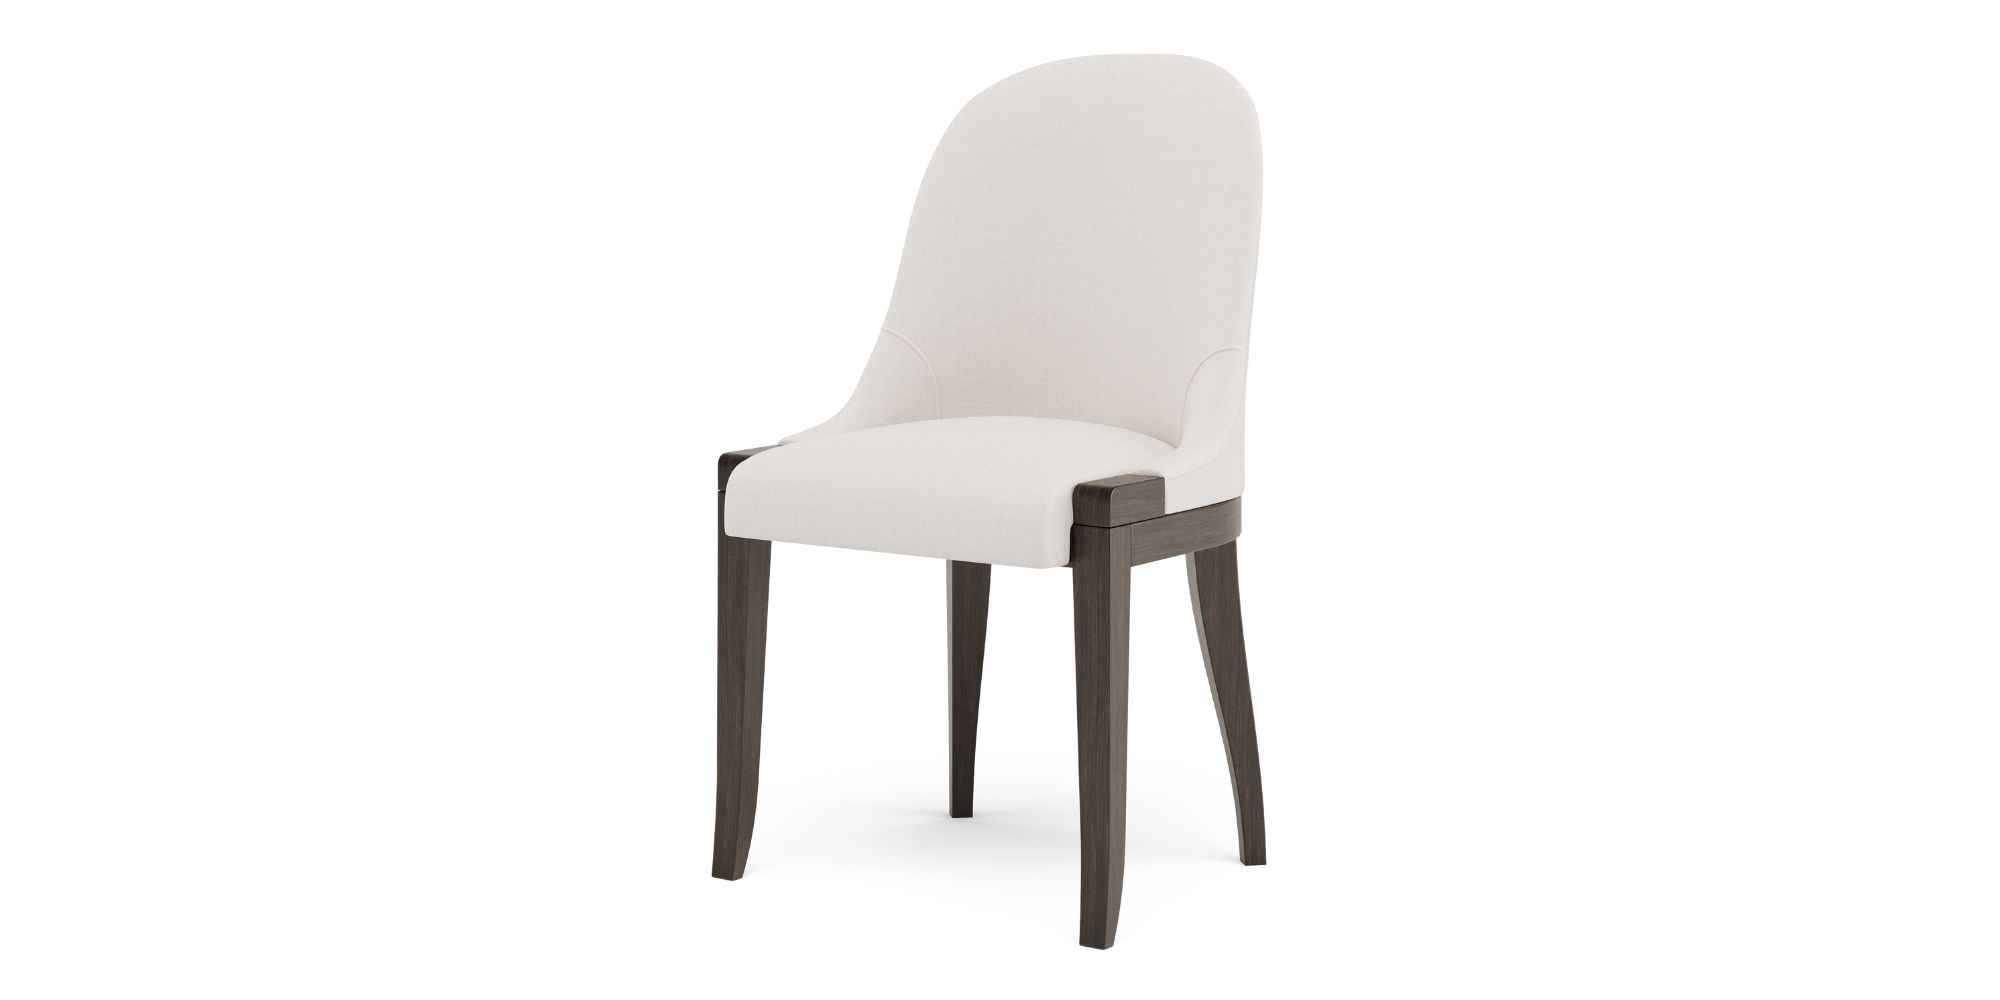 Silhouette Bar Stool in Outdoor Bar Stools for Silhouette collection